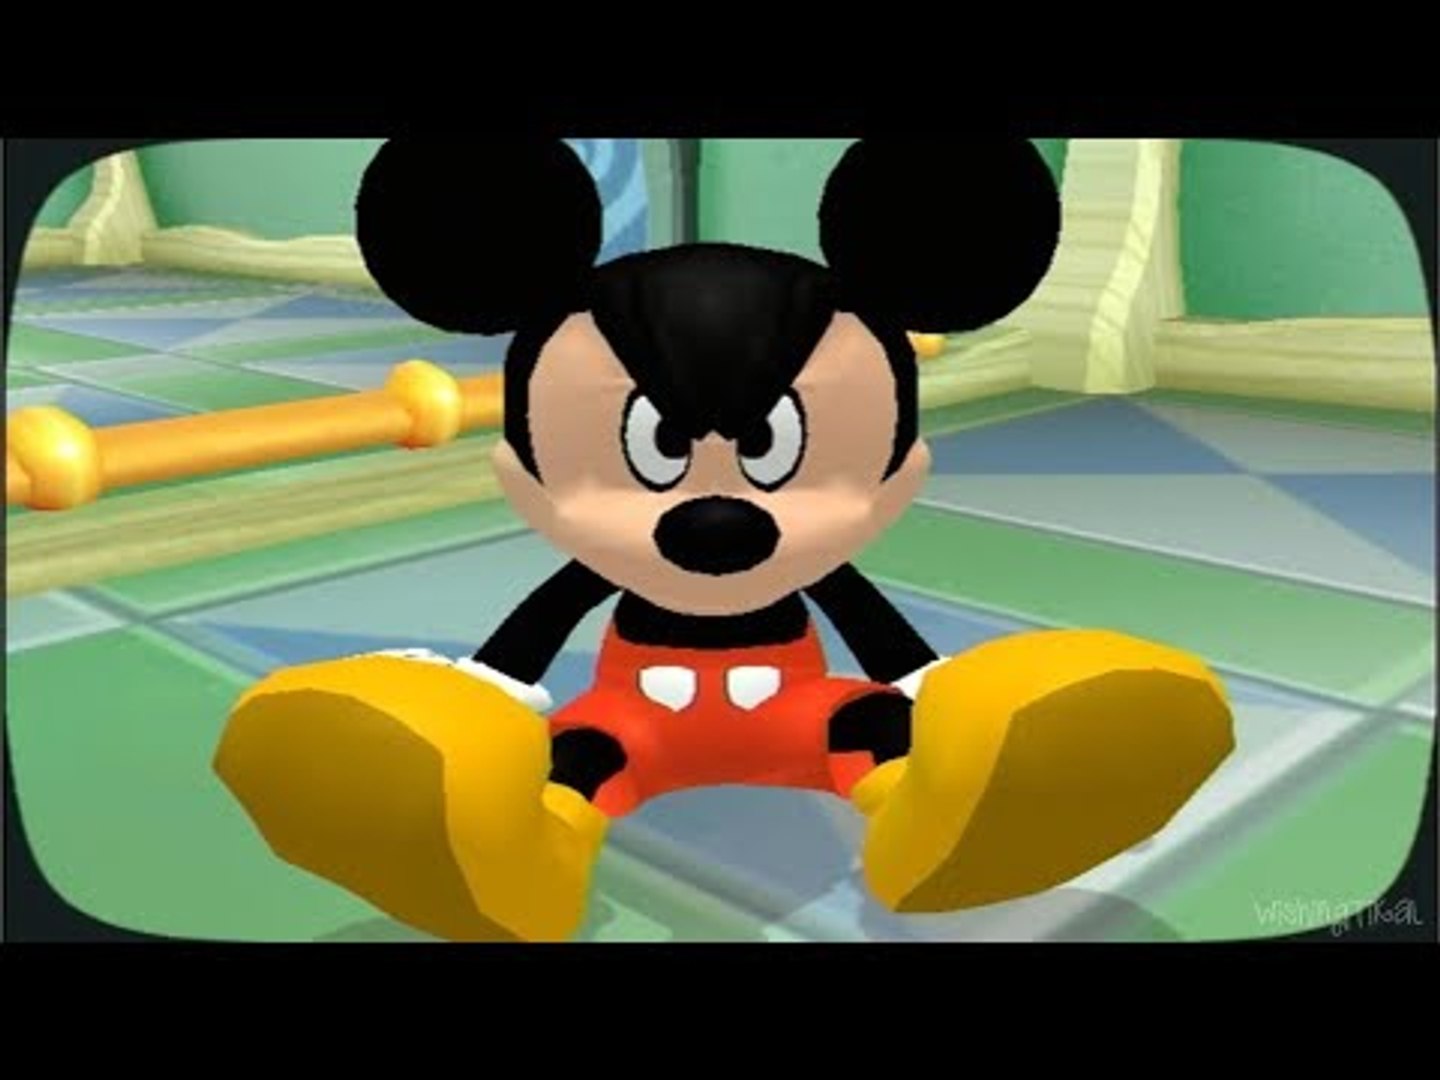 Disney's Magical Mirror Starring Mickey Mouse HD PART 12 (Game for Kids) 